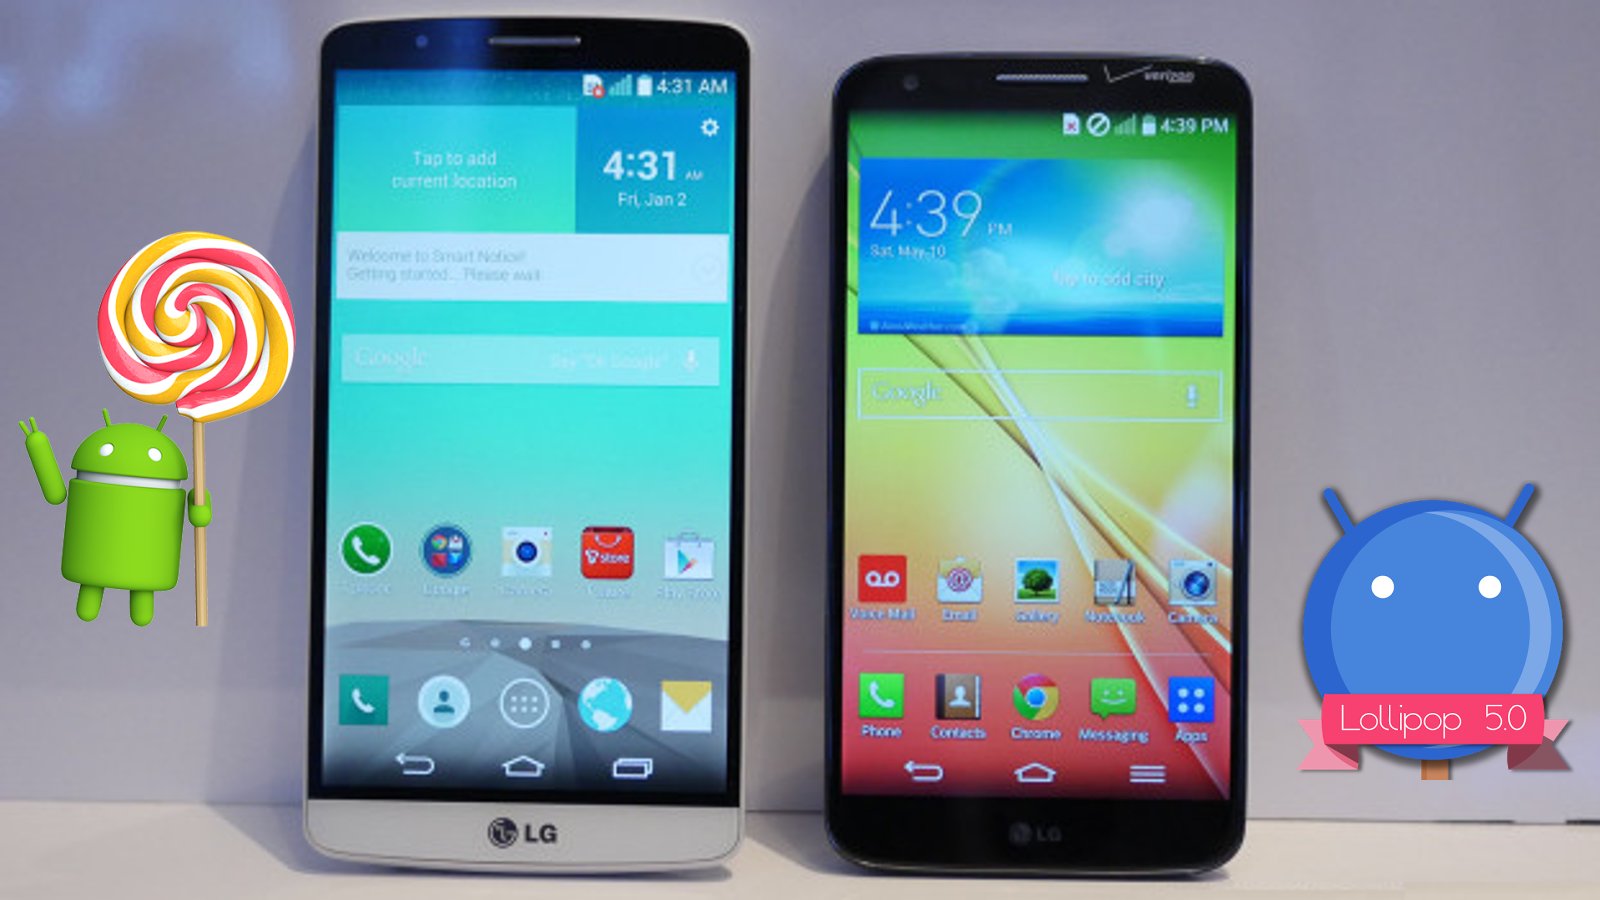 Android 5.0 Lollipop Updates For T-Mobile LG G3 And LG G2 Enters Carrier Testing